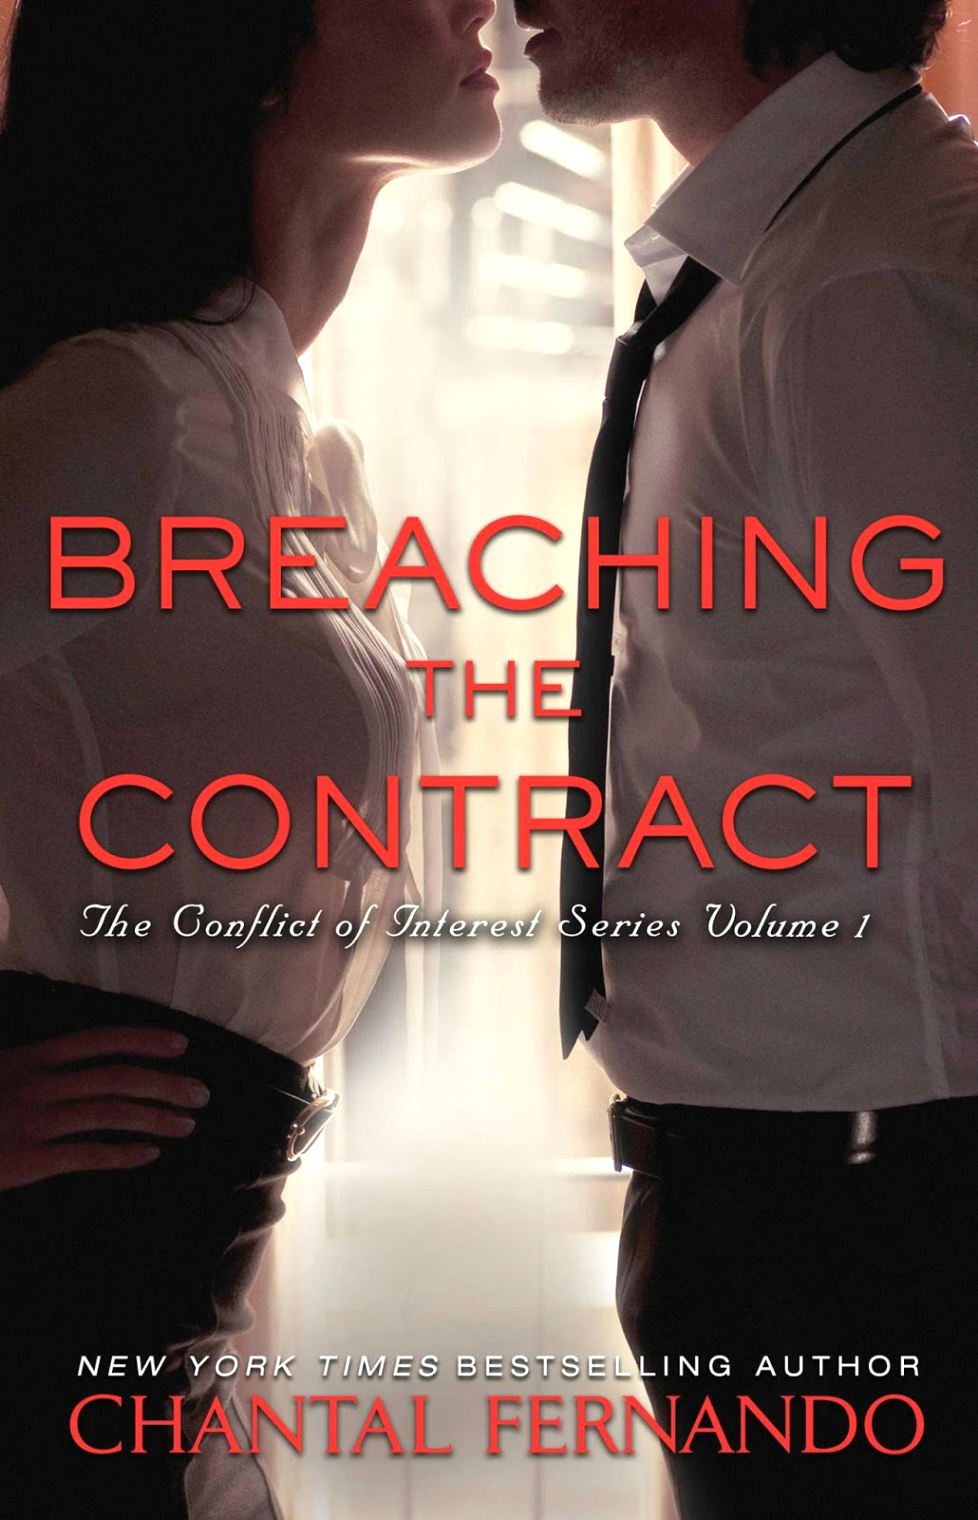 happy book birthday arc review of breaching the contract the conflict of interest series 1 by chantal fernando givemebooksblog chantalfernando chantal fernando author